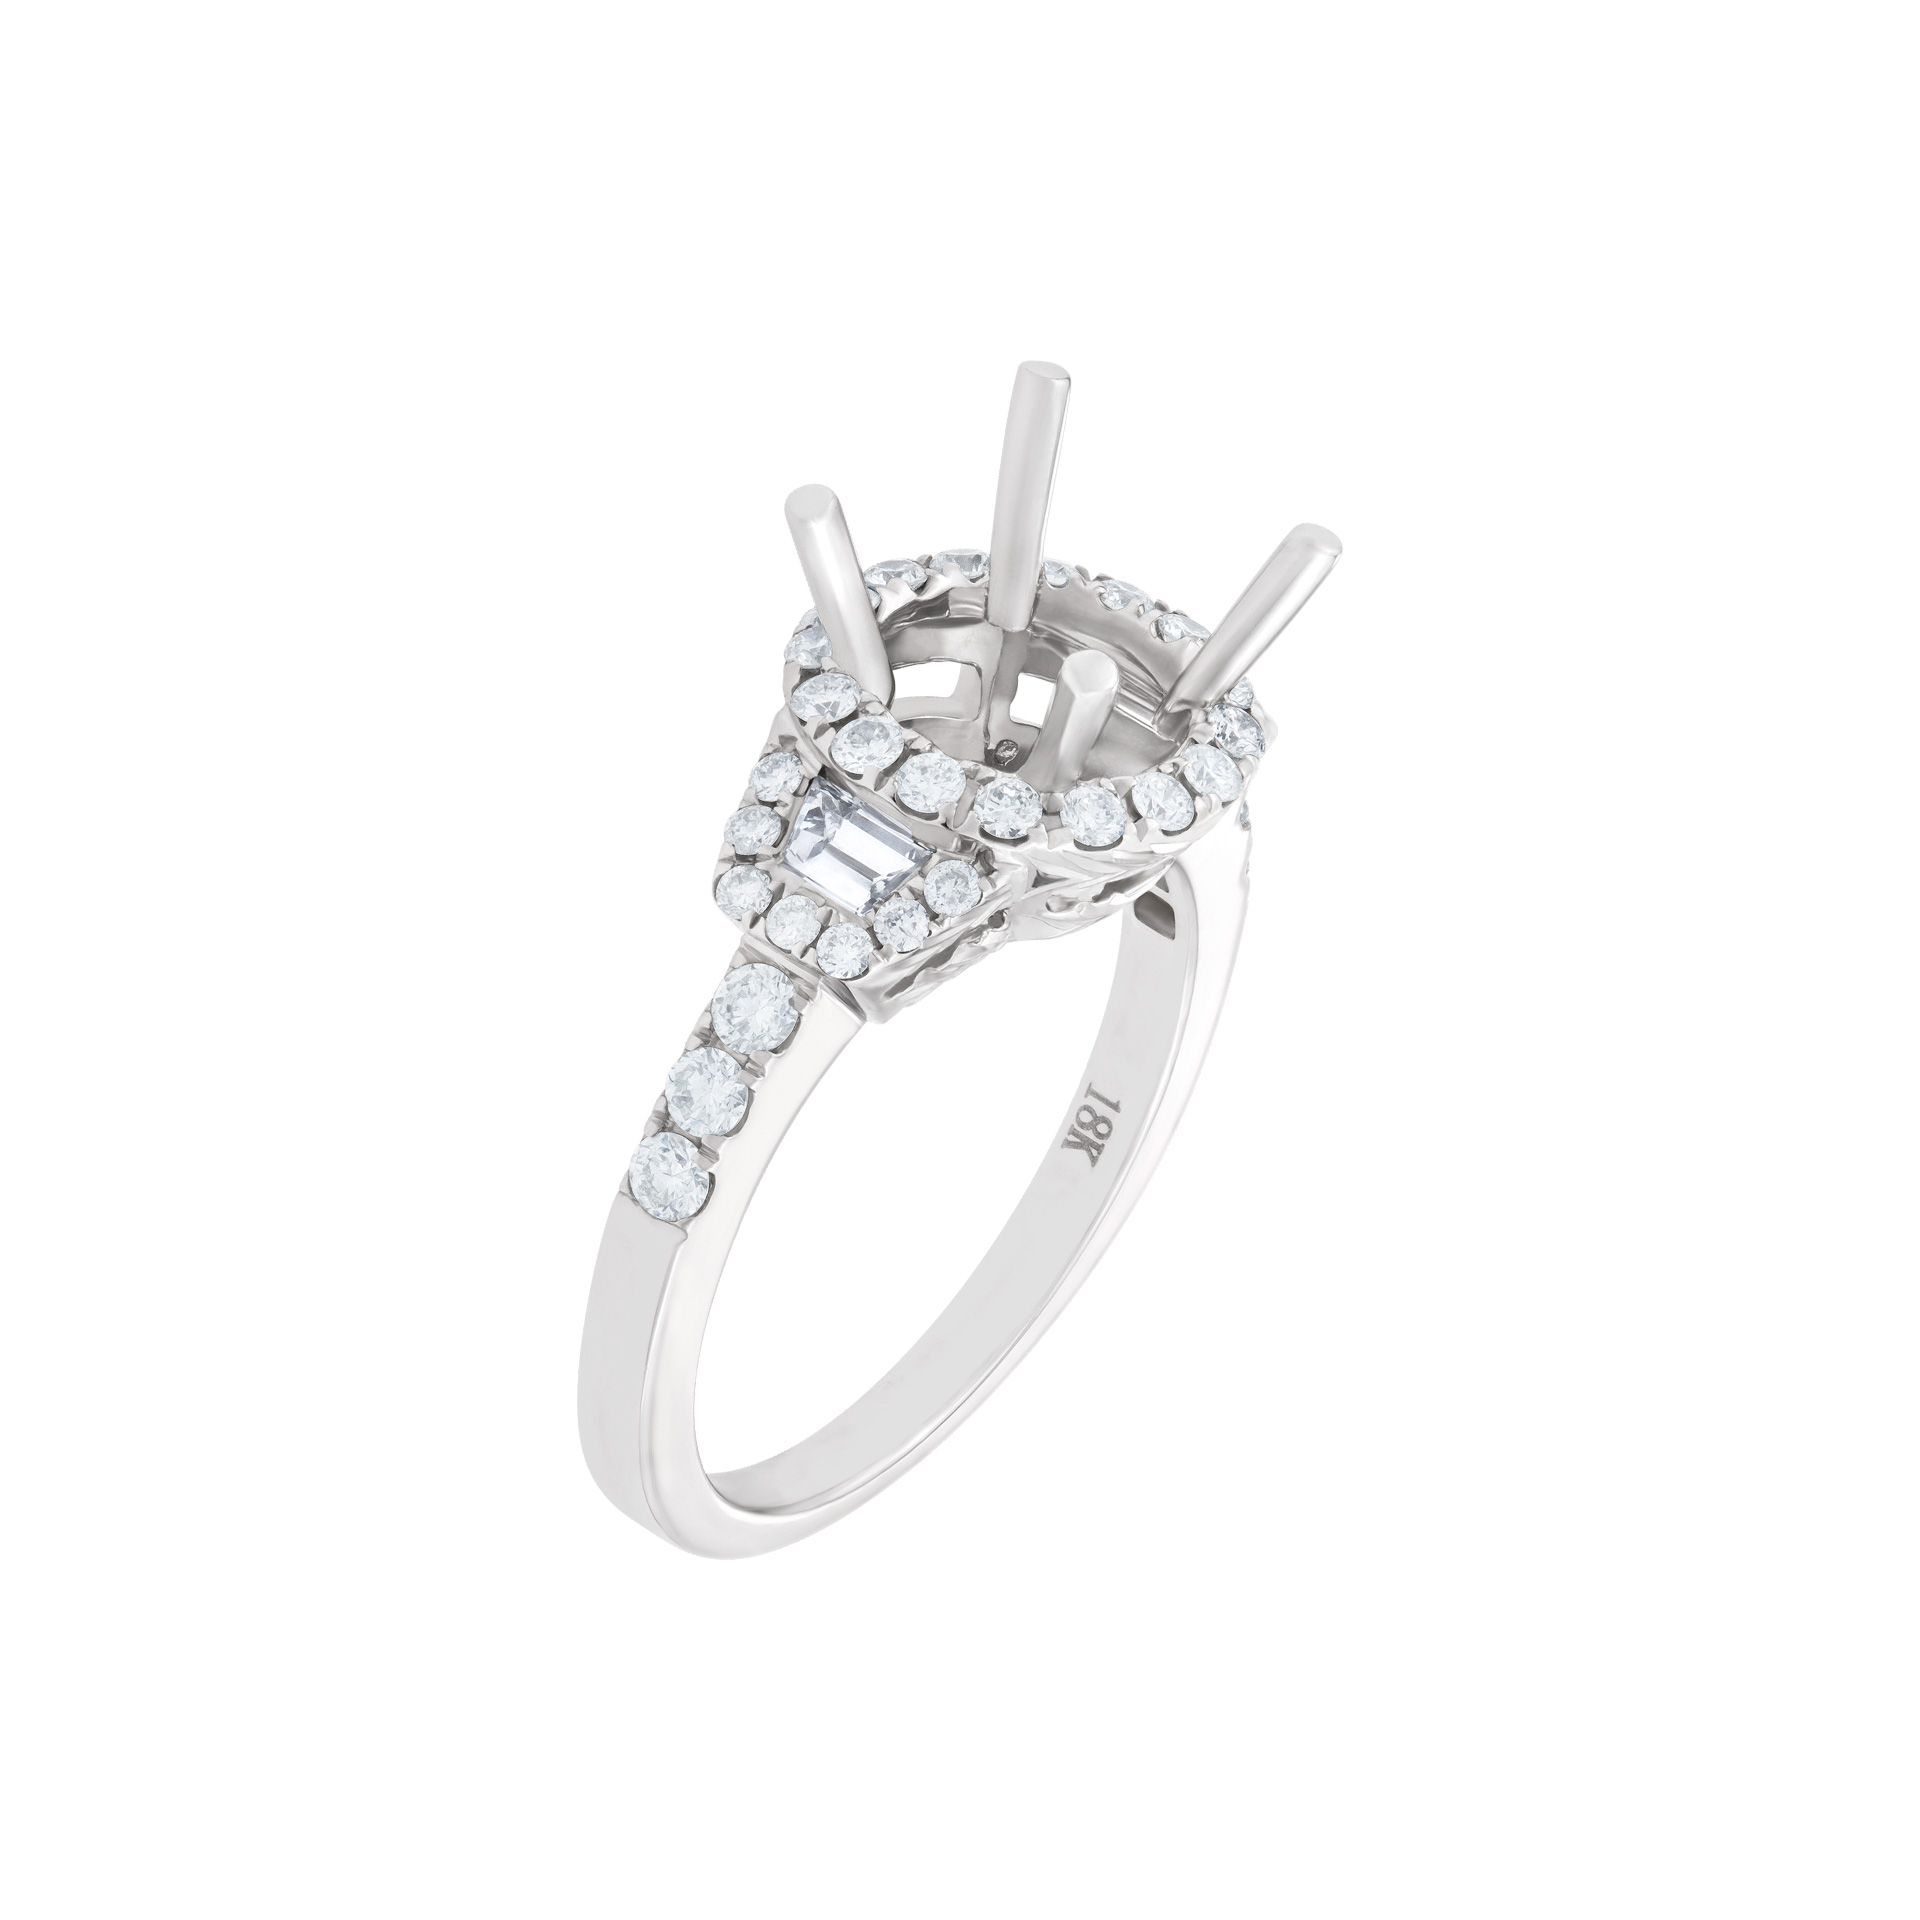 18k White Gold Setting With .88 Cts In Diamonds image 1